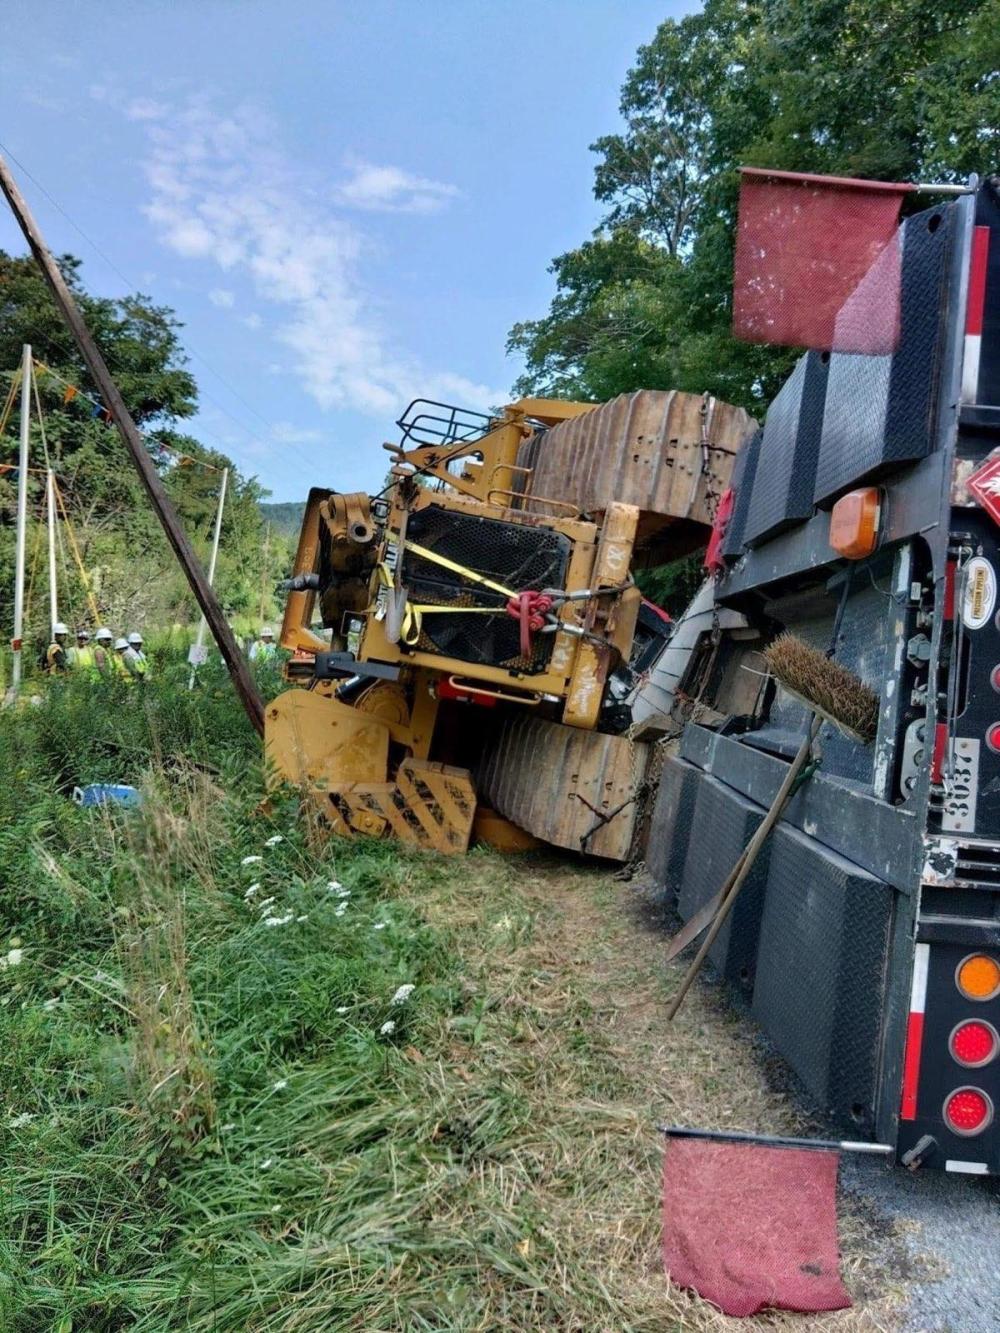 An excavator lays flipped on its side